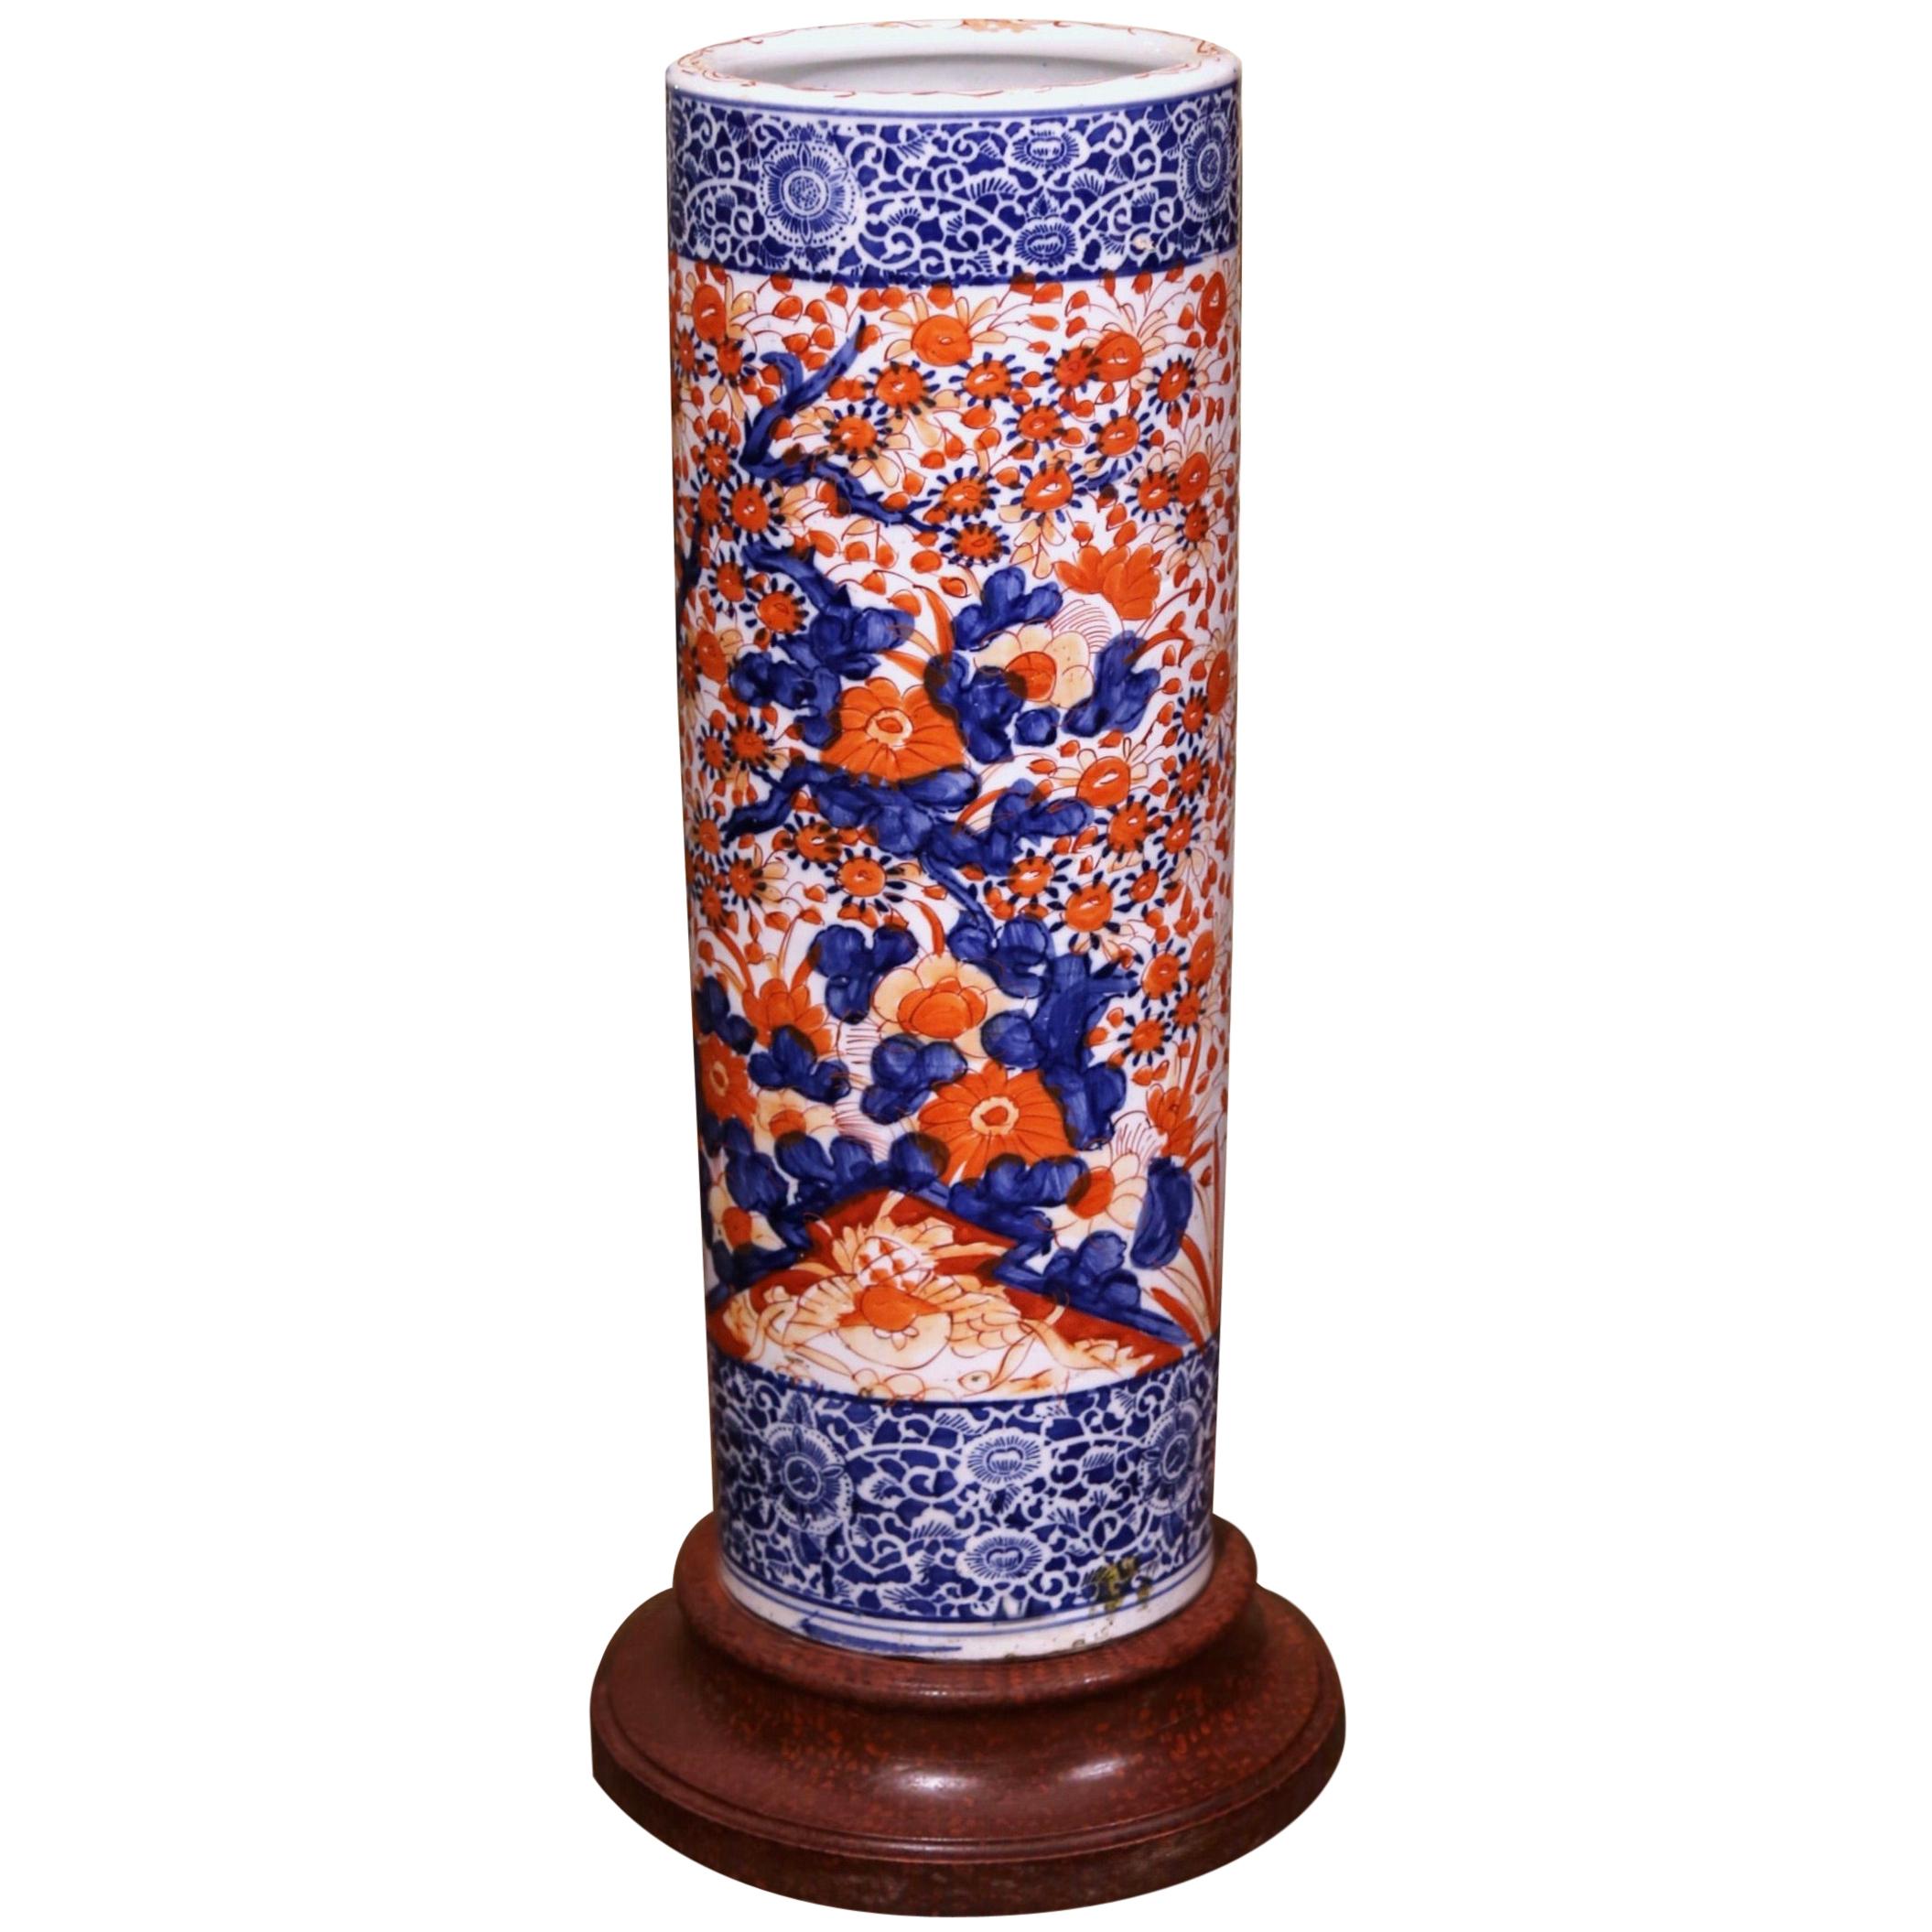 Early 20th Century Japanese Hand Painted Imari Porcelain Umbrella Stand